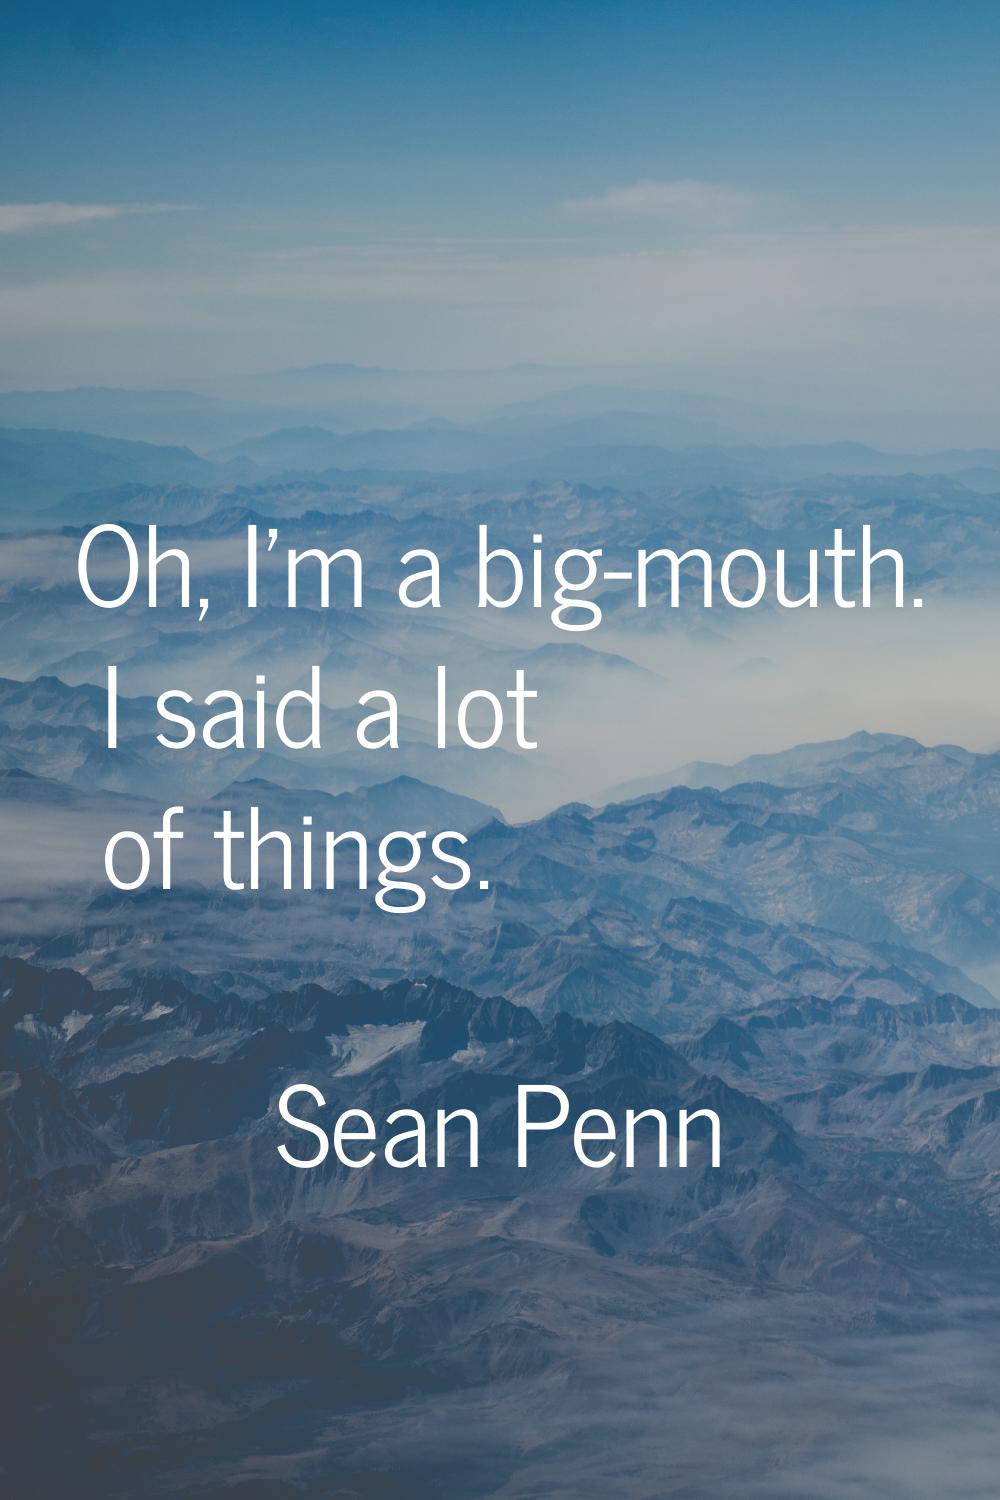 Oh, I'm a big-mouth. I said a lot of things.